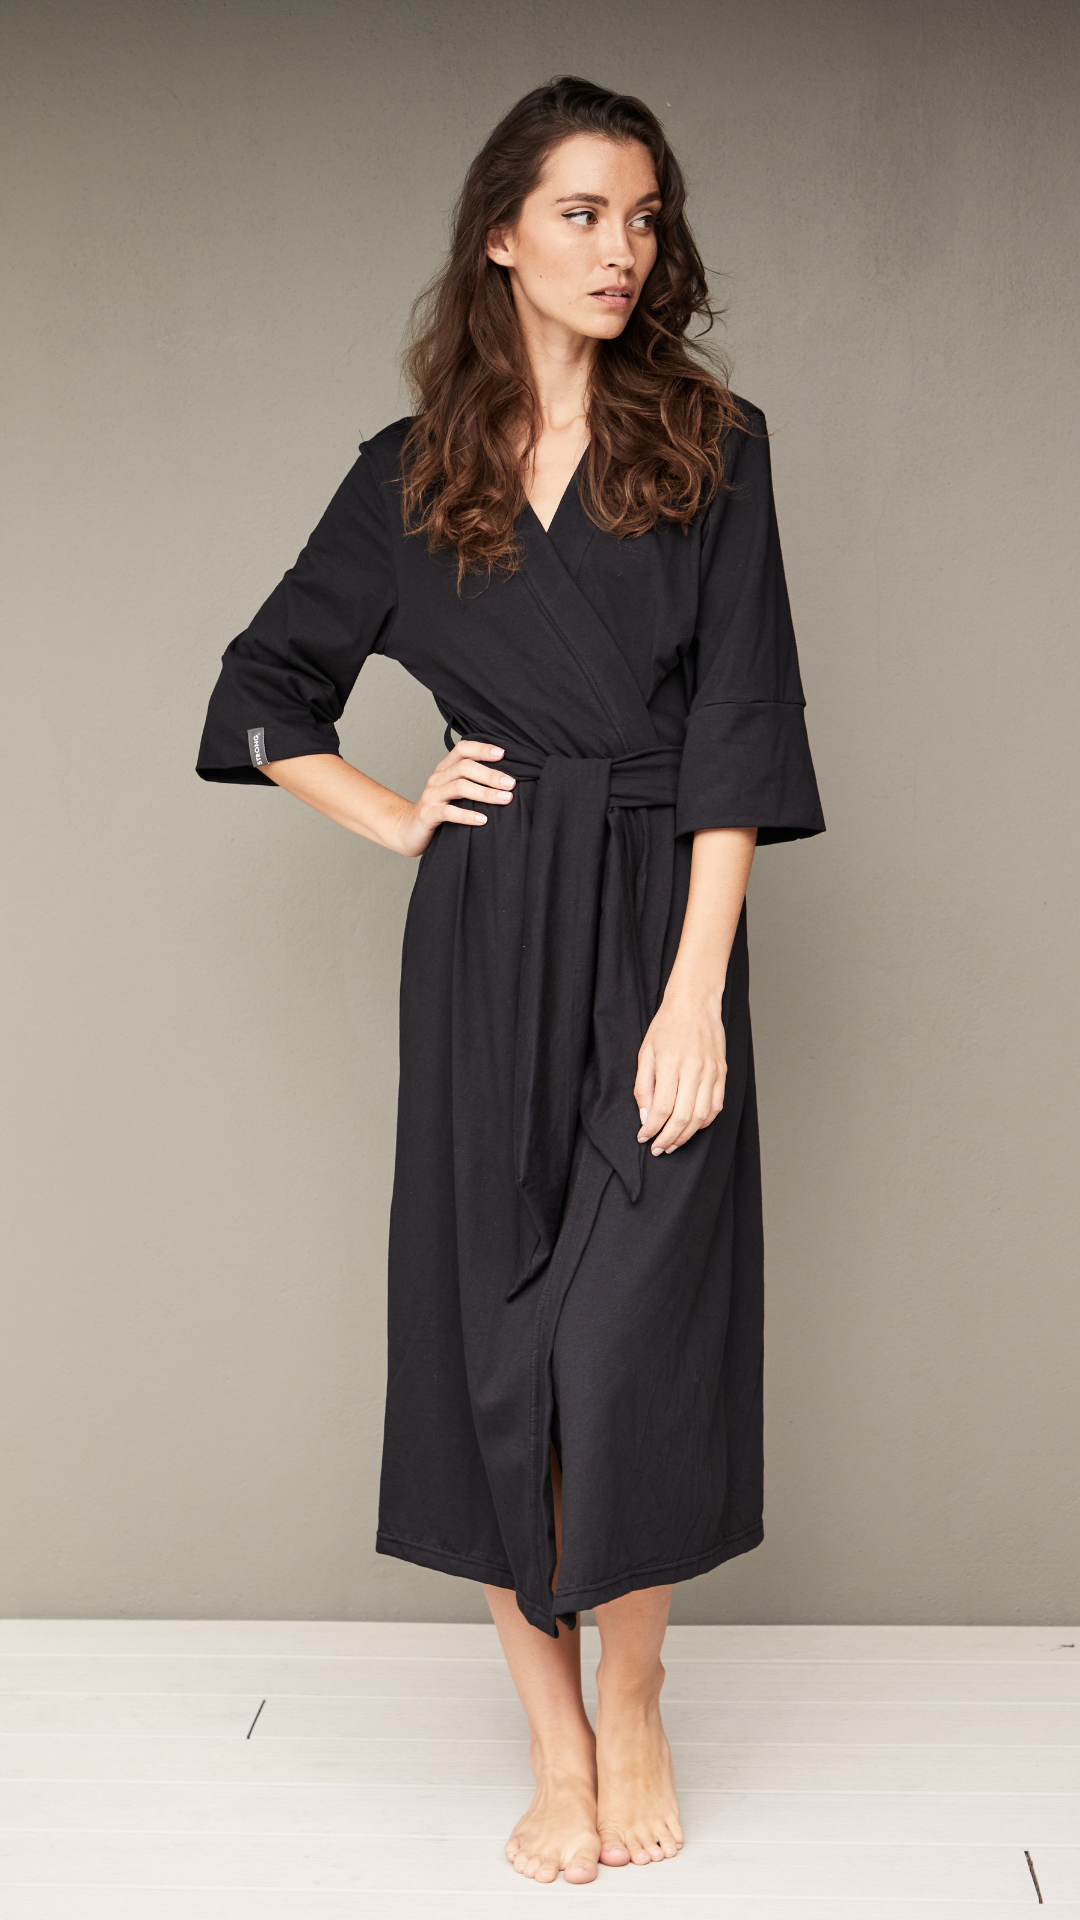 Ladies: The Maxi Gown